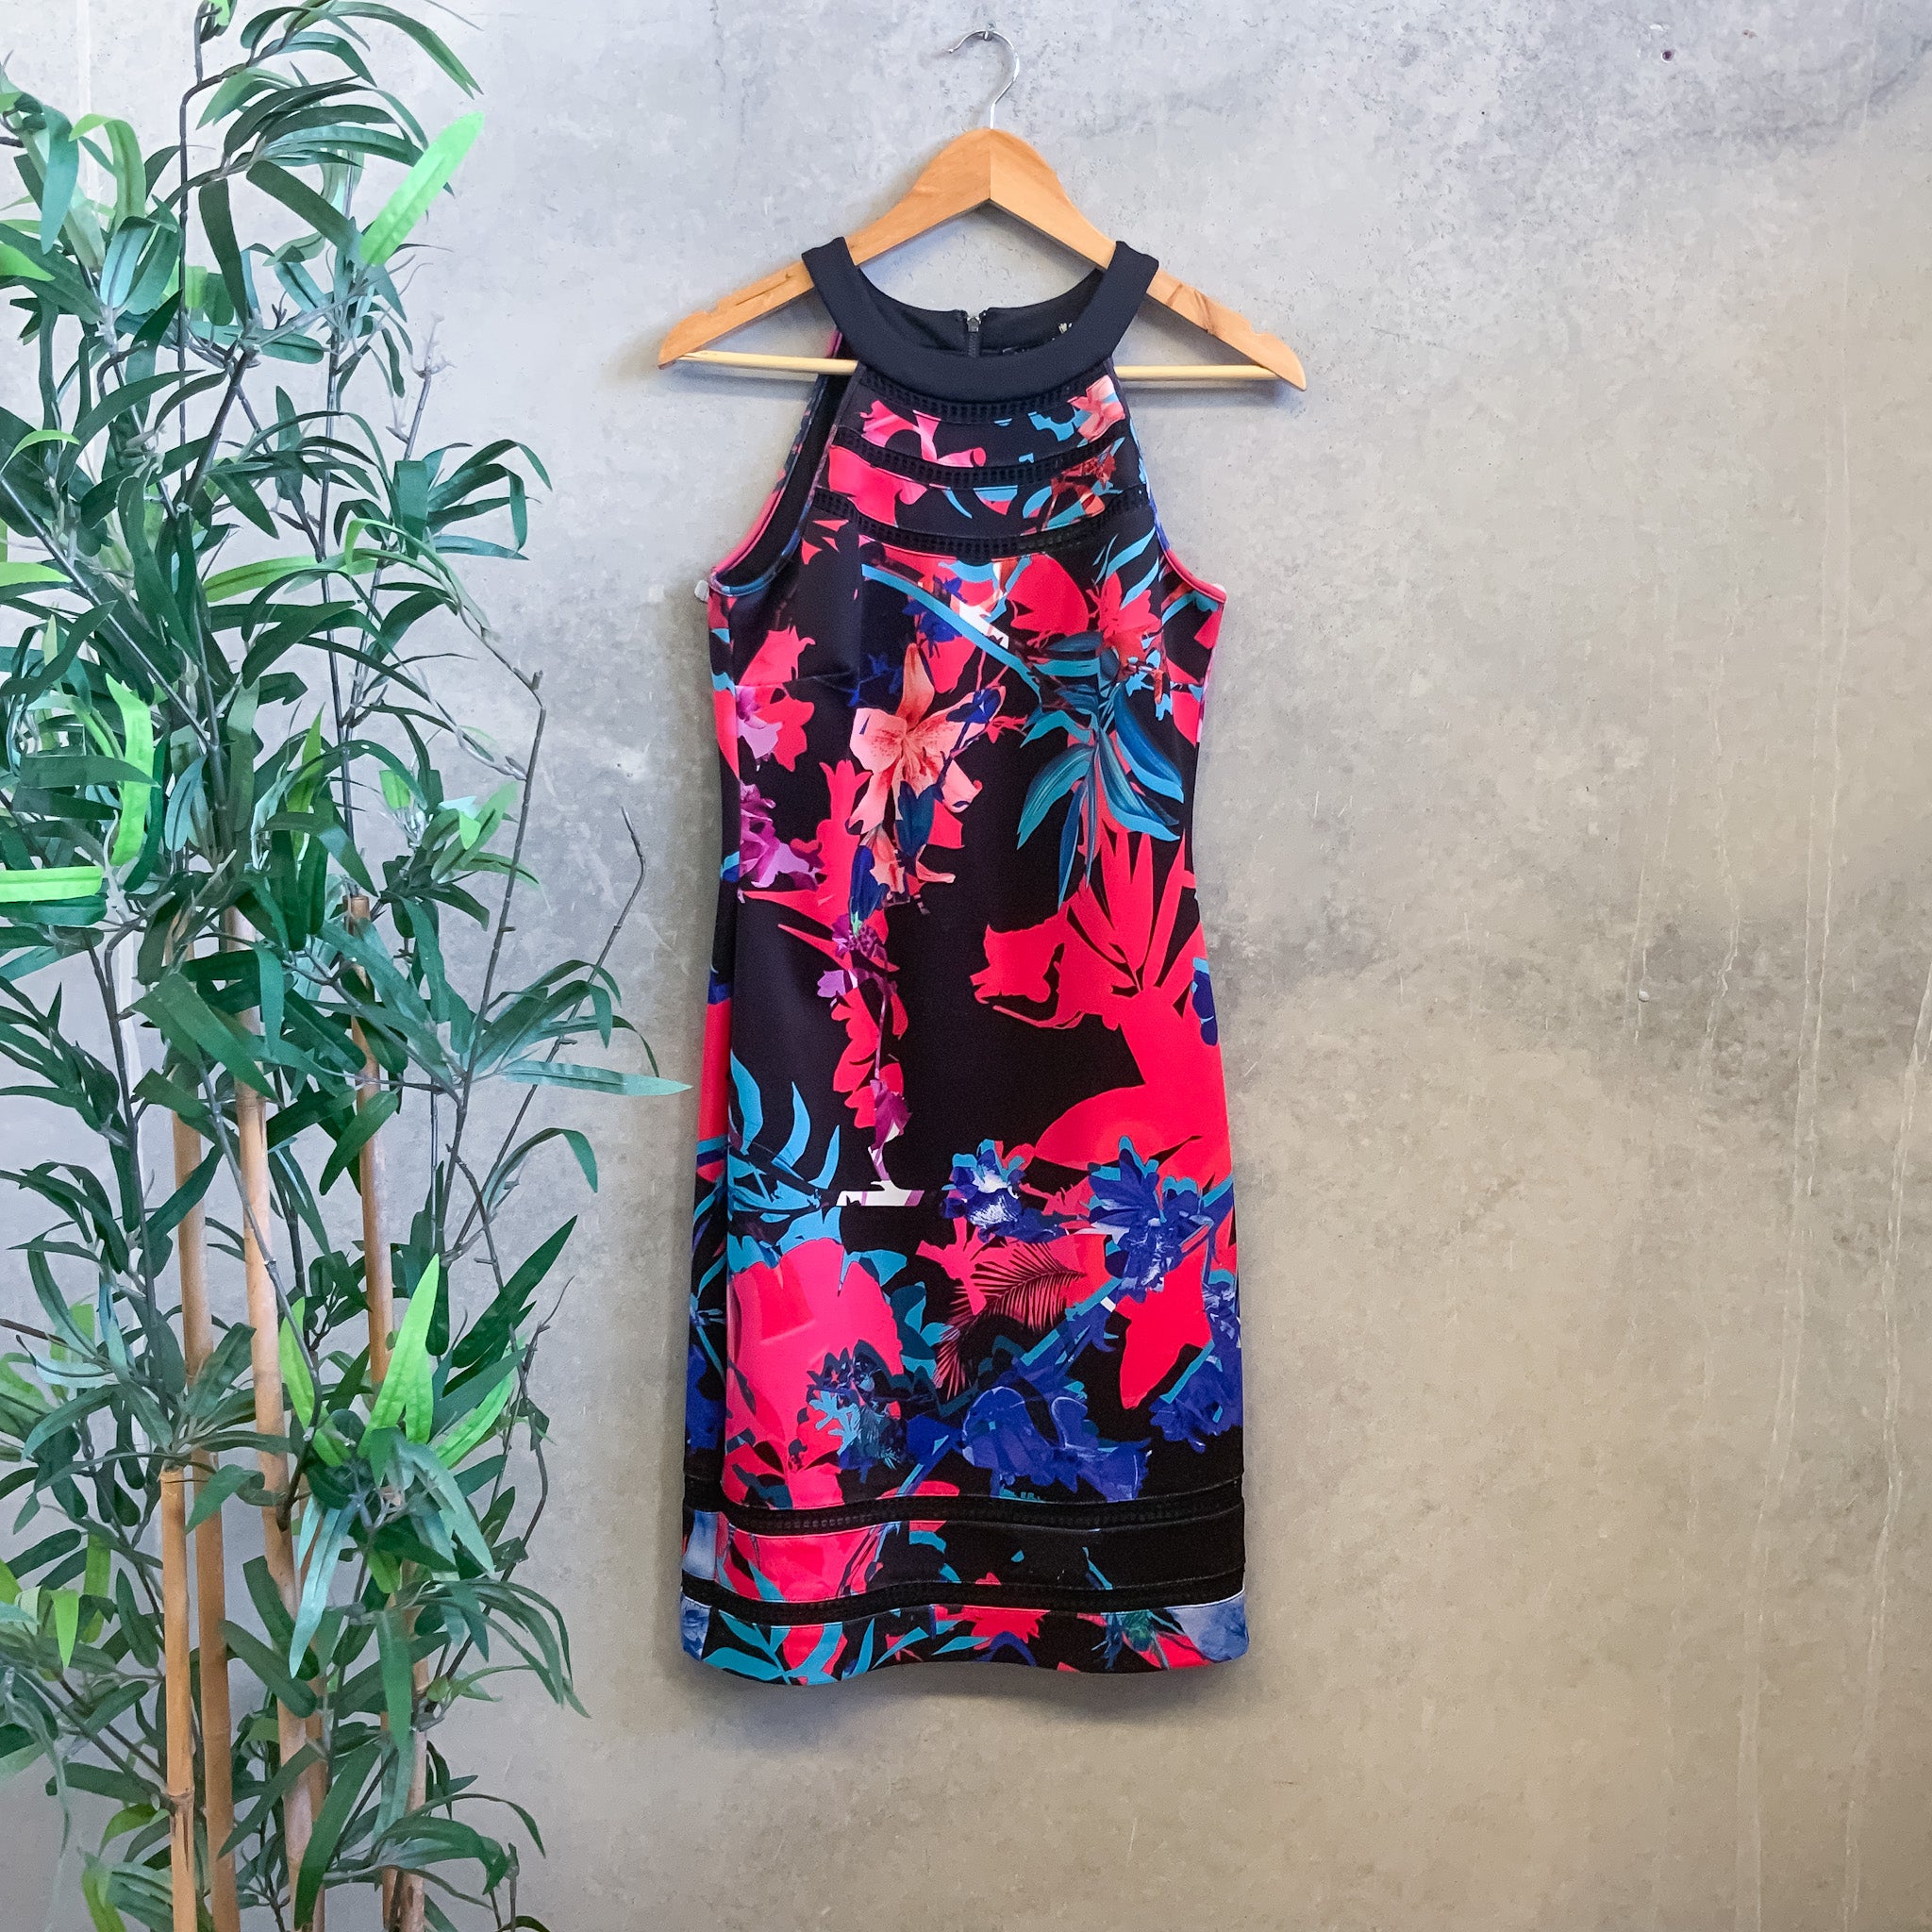 TABLE EIGHT Black Red Blue Floral Print Sleeveless Knee Length A-Line Dress - Size 8